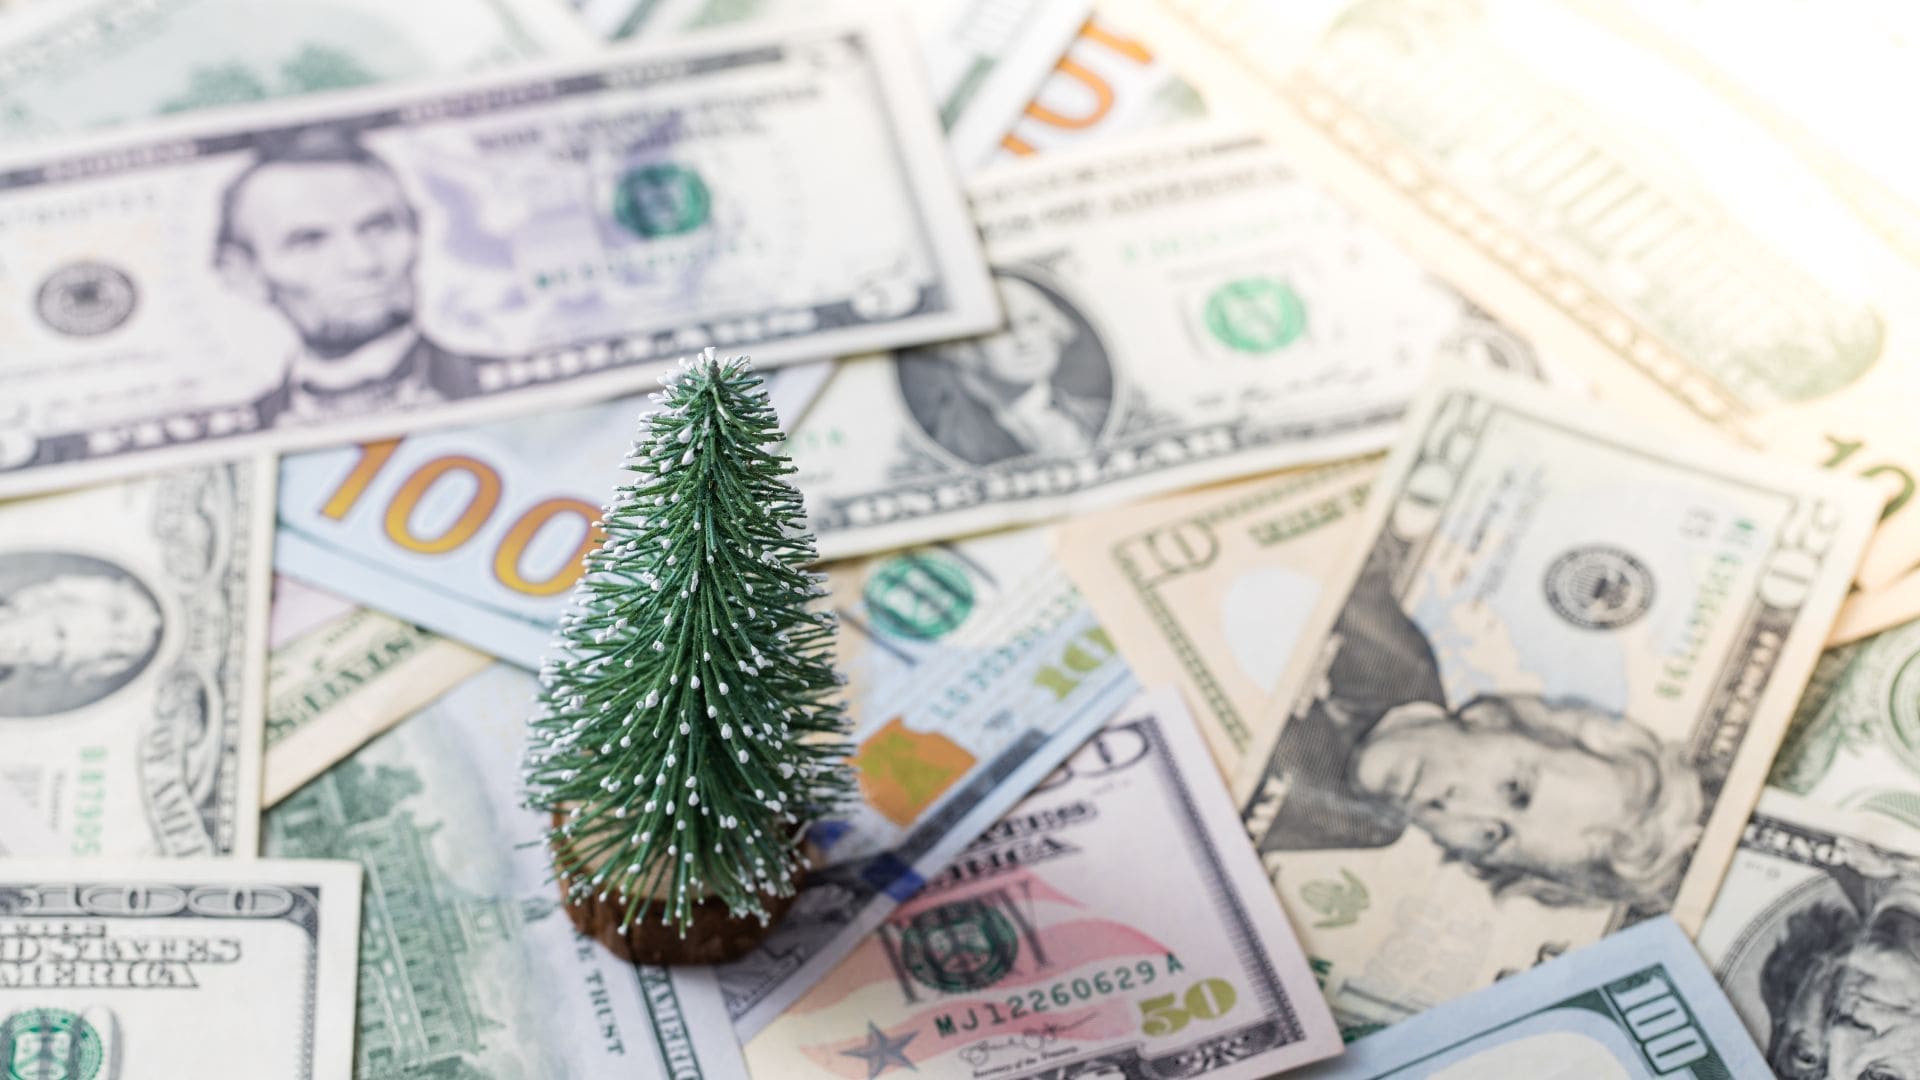 Social Security is not sending a bonus payment in Christmas